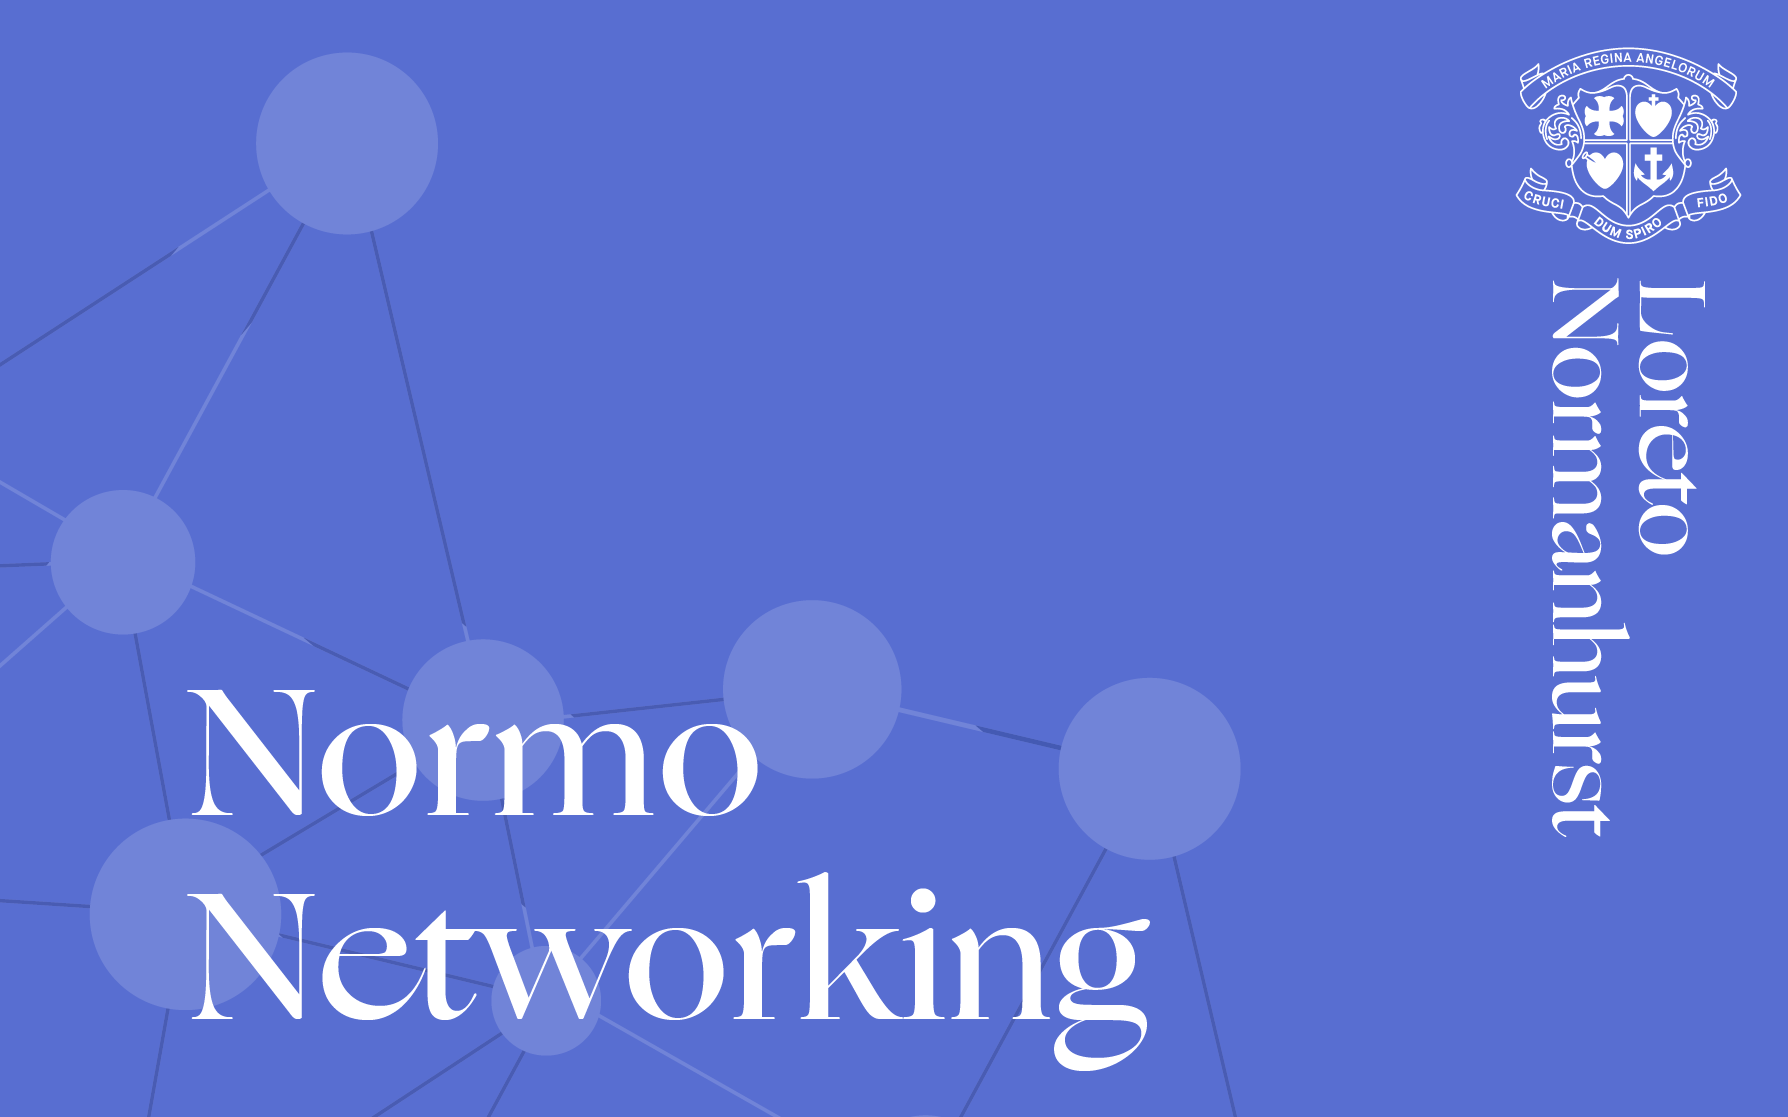 Normo Networking - Event Banner_v1